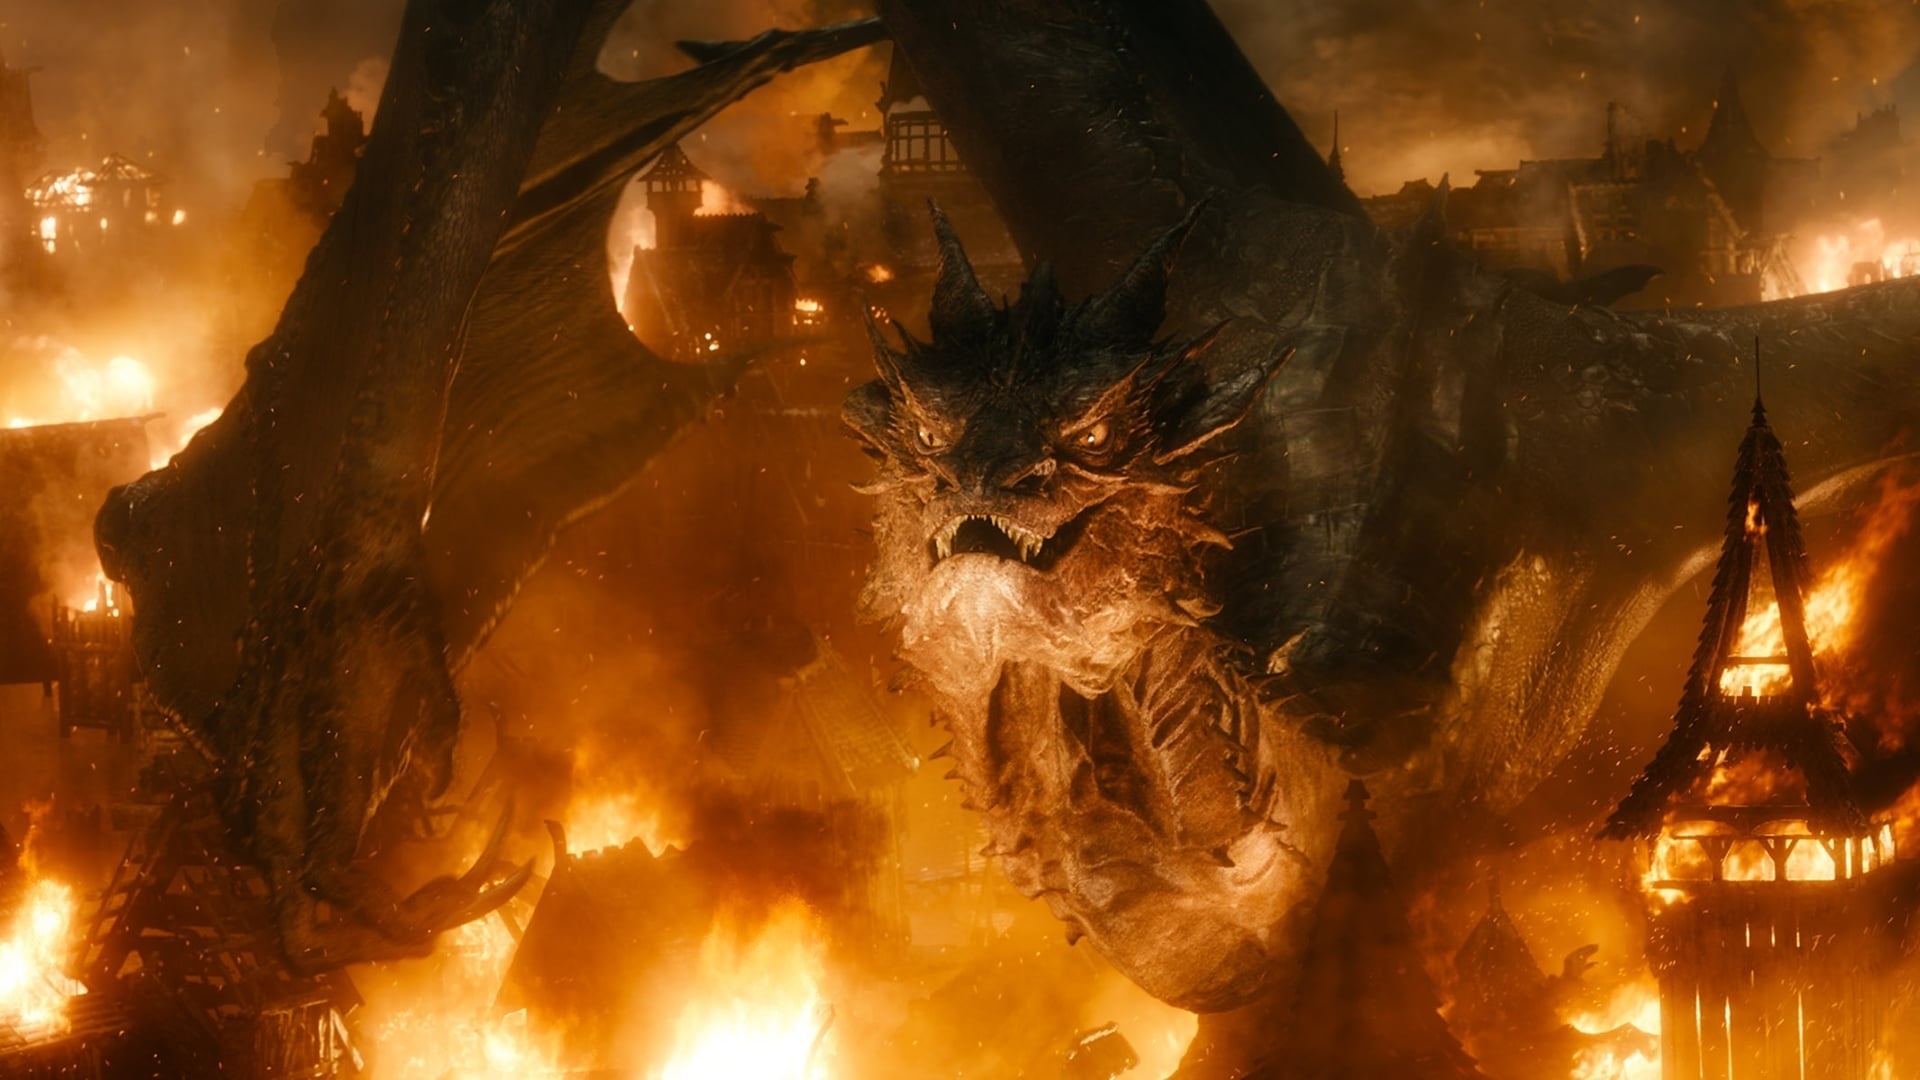 Smaug, Battle of the Five Armies, Backdrops, Movie, 1920x1080 Full HD Desktop